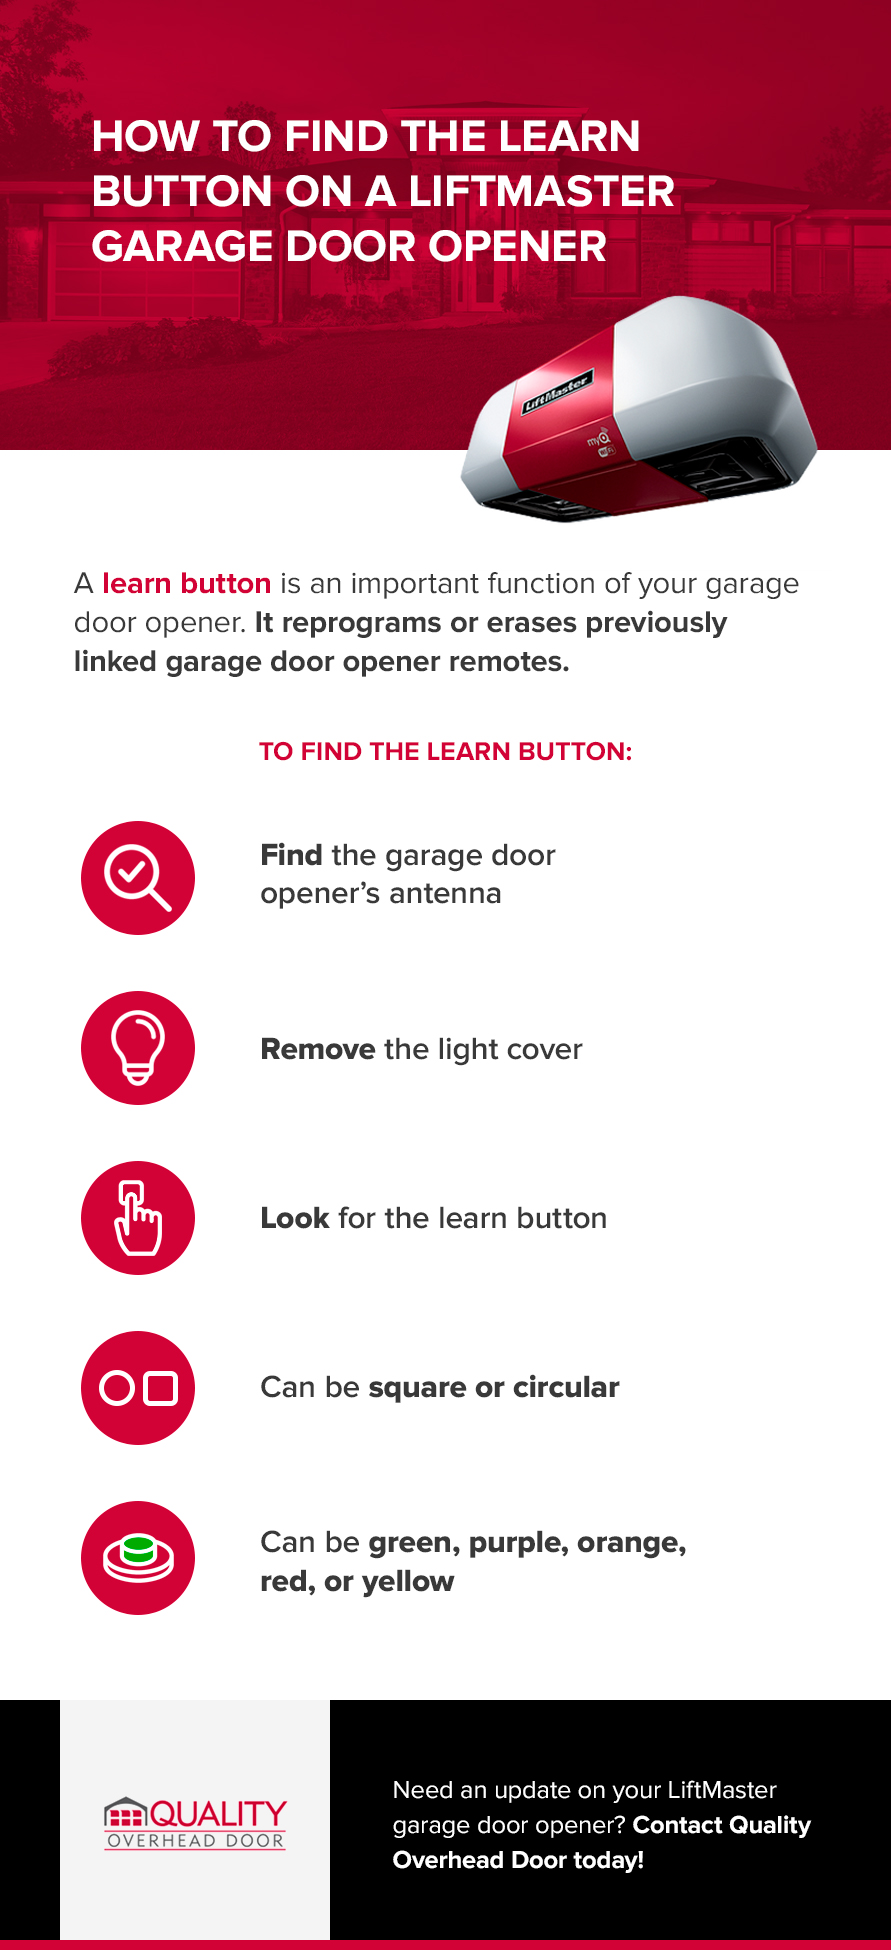 How To Find the Learn Button on a Liftmaster Garage Door Opener Micrographic